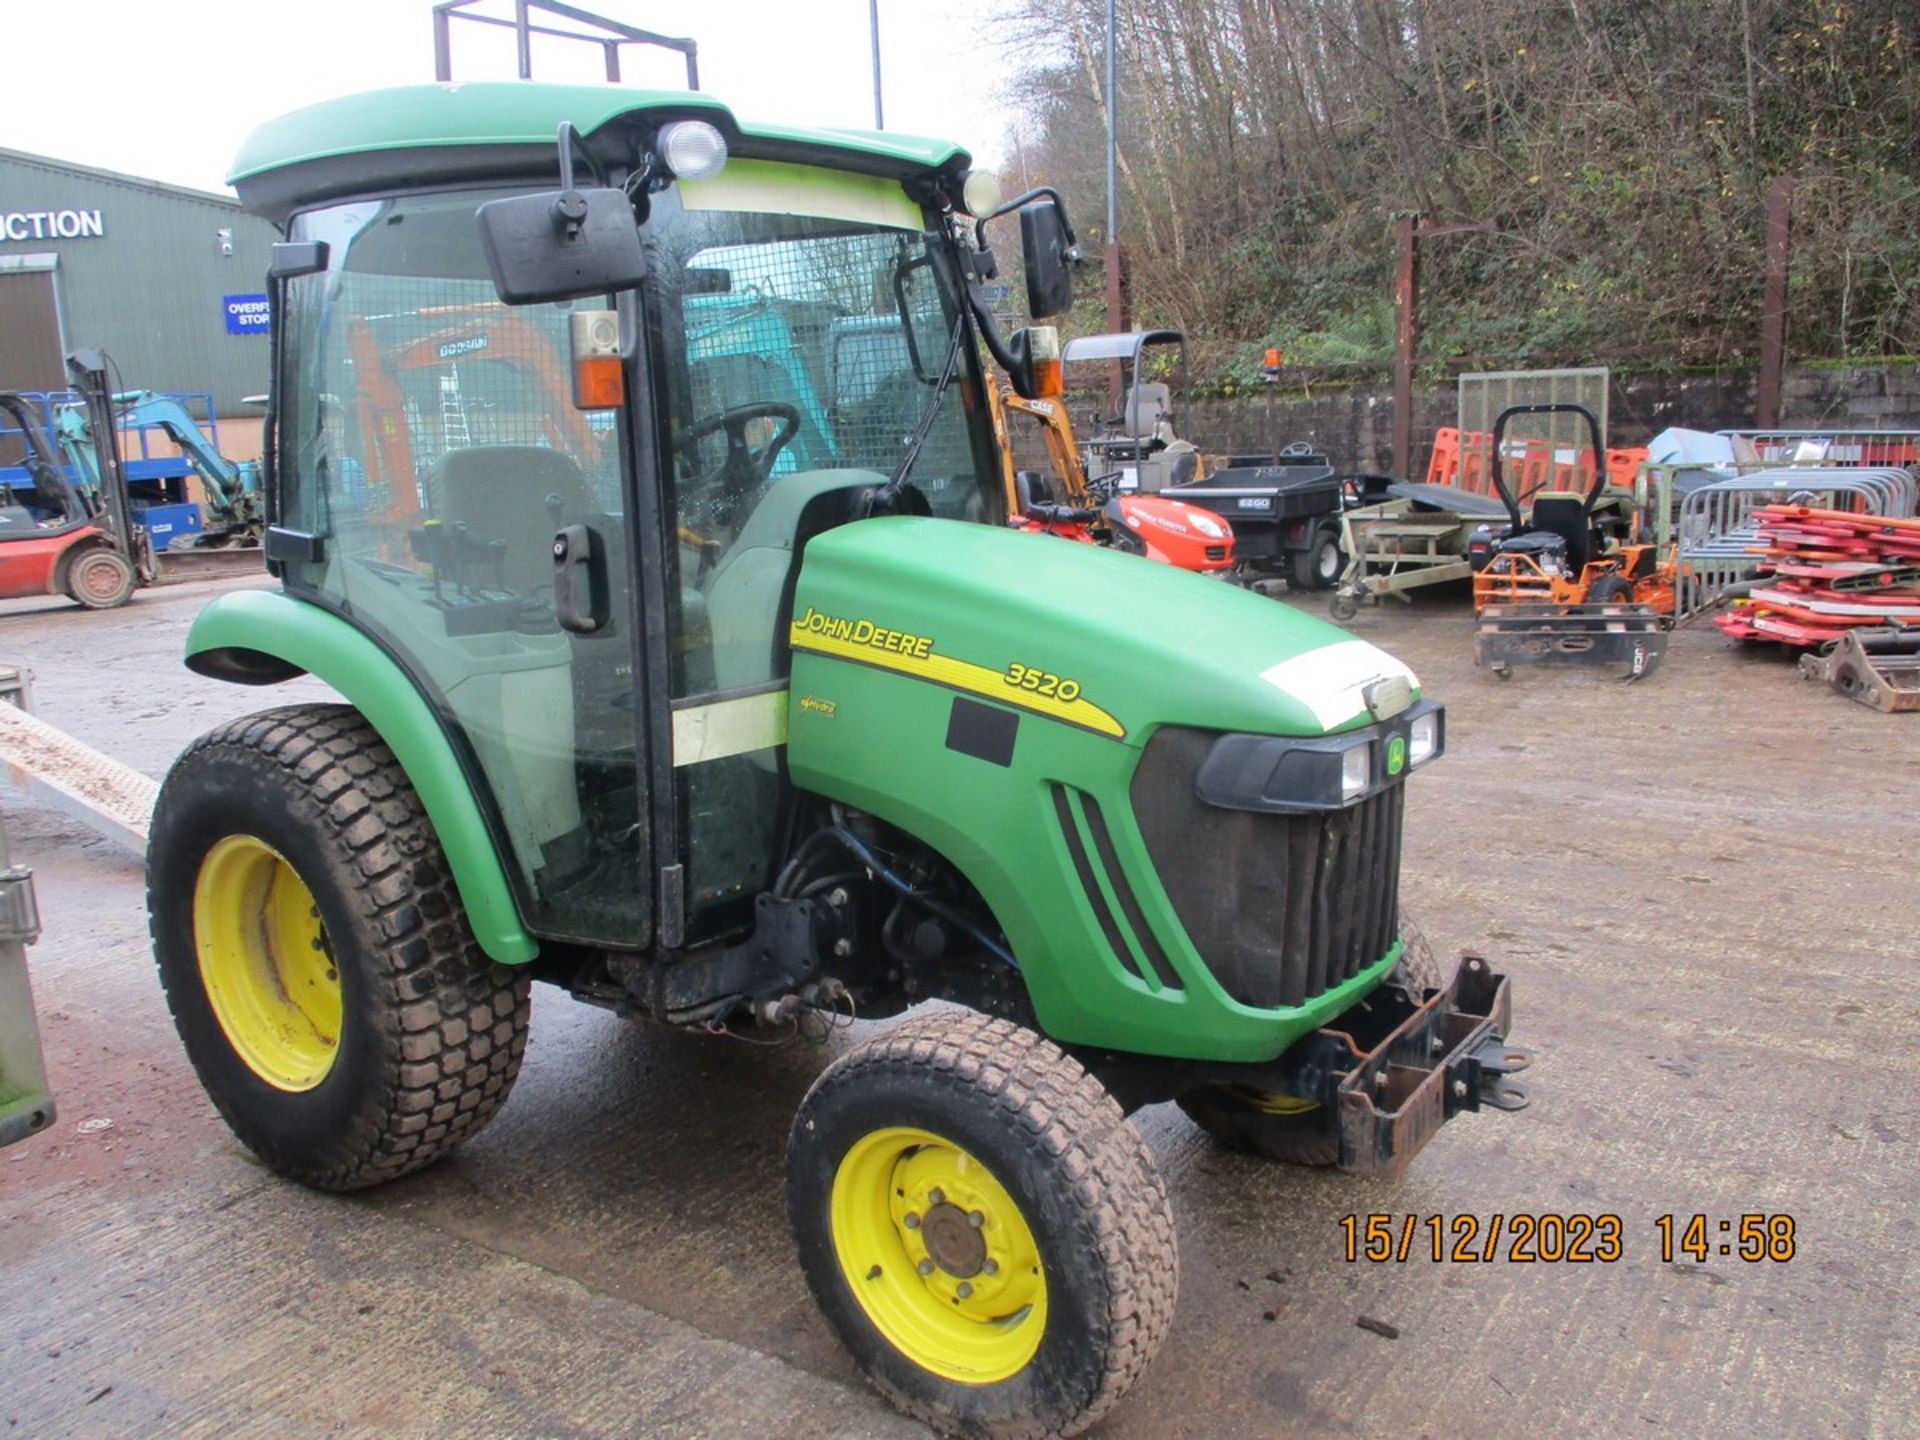 JOHN DEERE 3520 TRACTOR 2009 SHOWS 2250HRS C.W V5 SHOWING 1 COUNCIL OWNER FROM NEW NON RUNNER